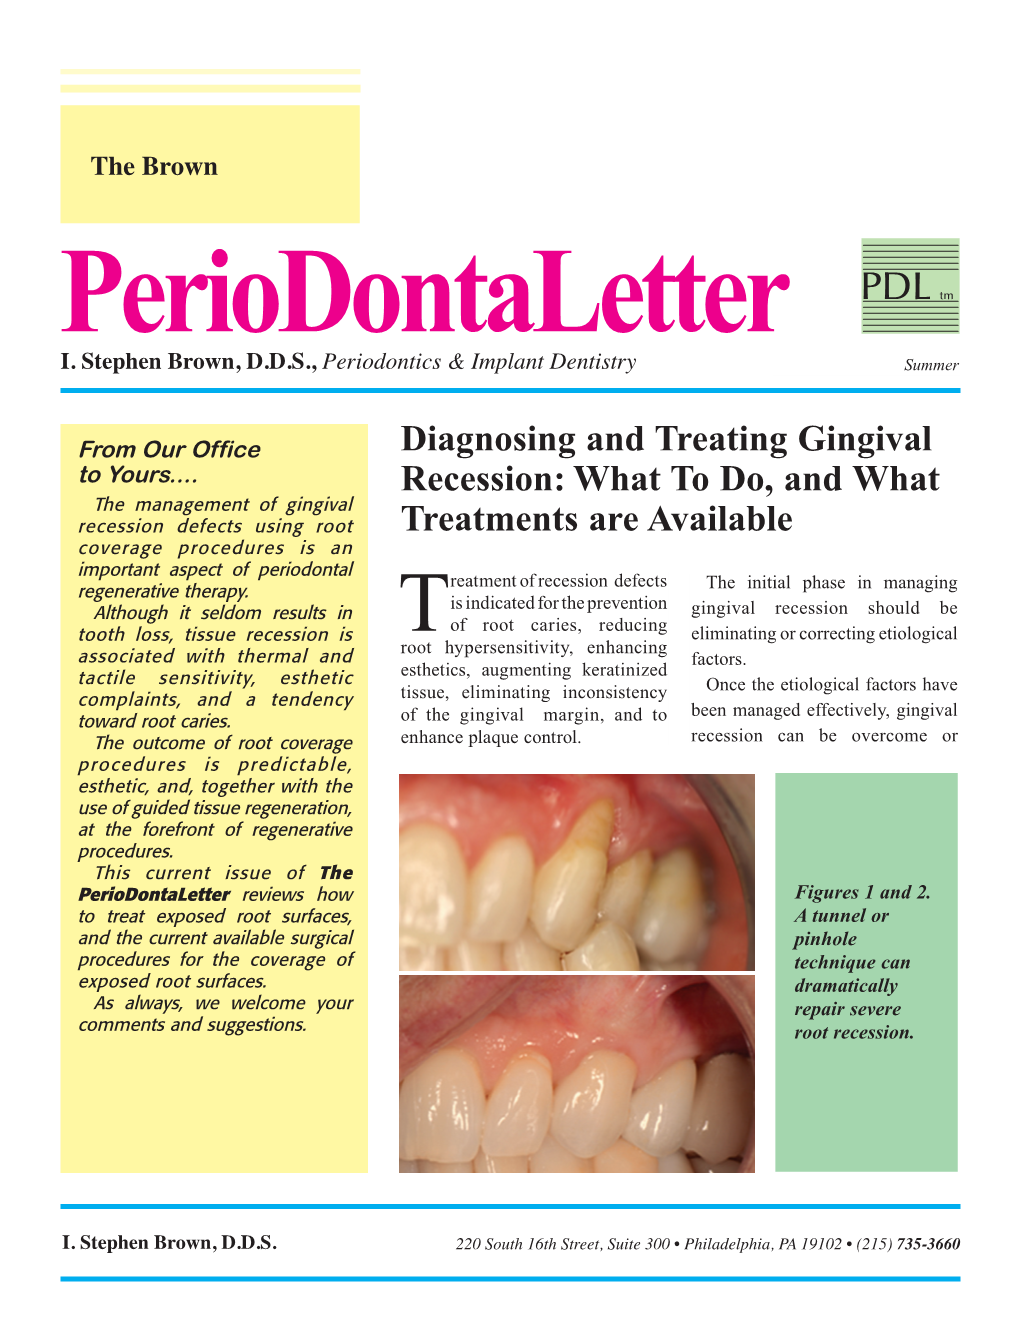 Diagnosing and Treating Gingival Recession